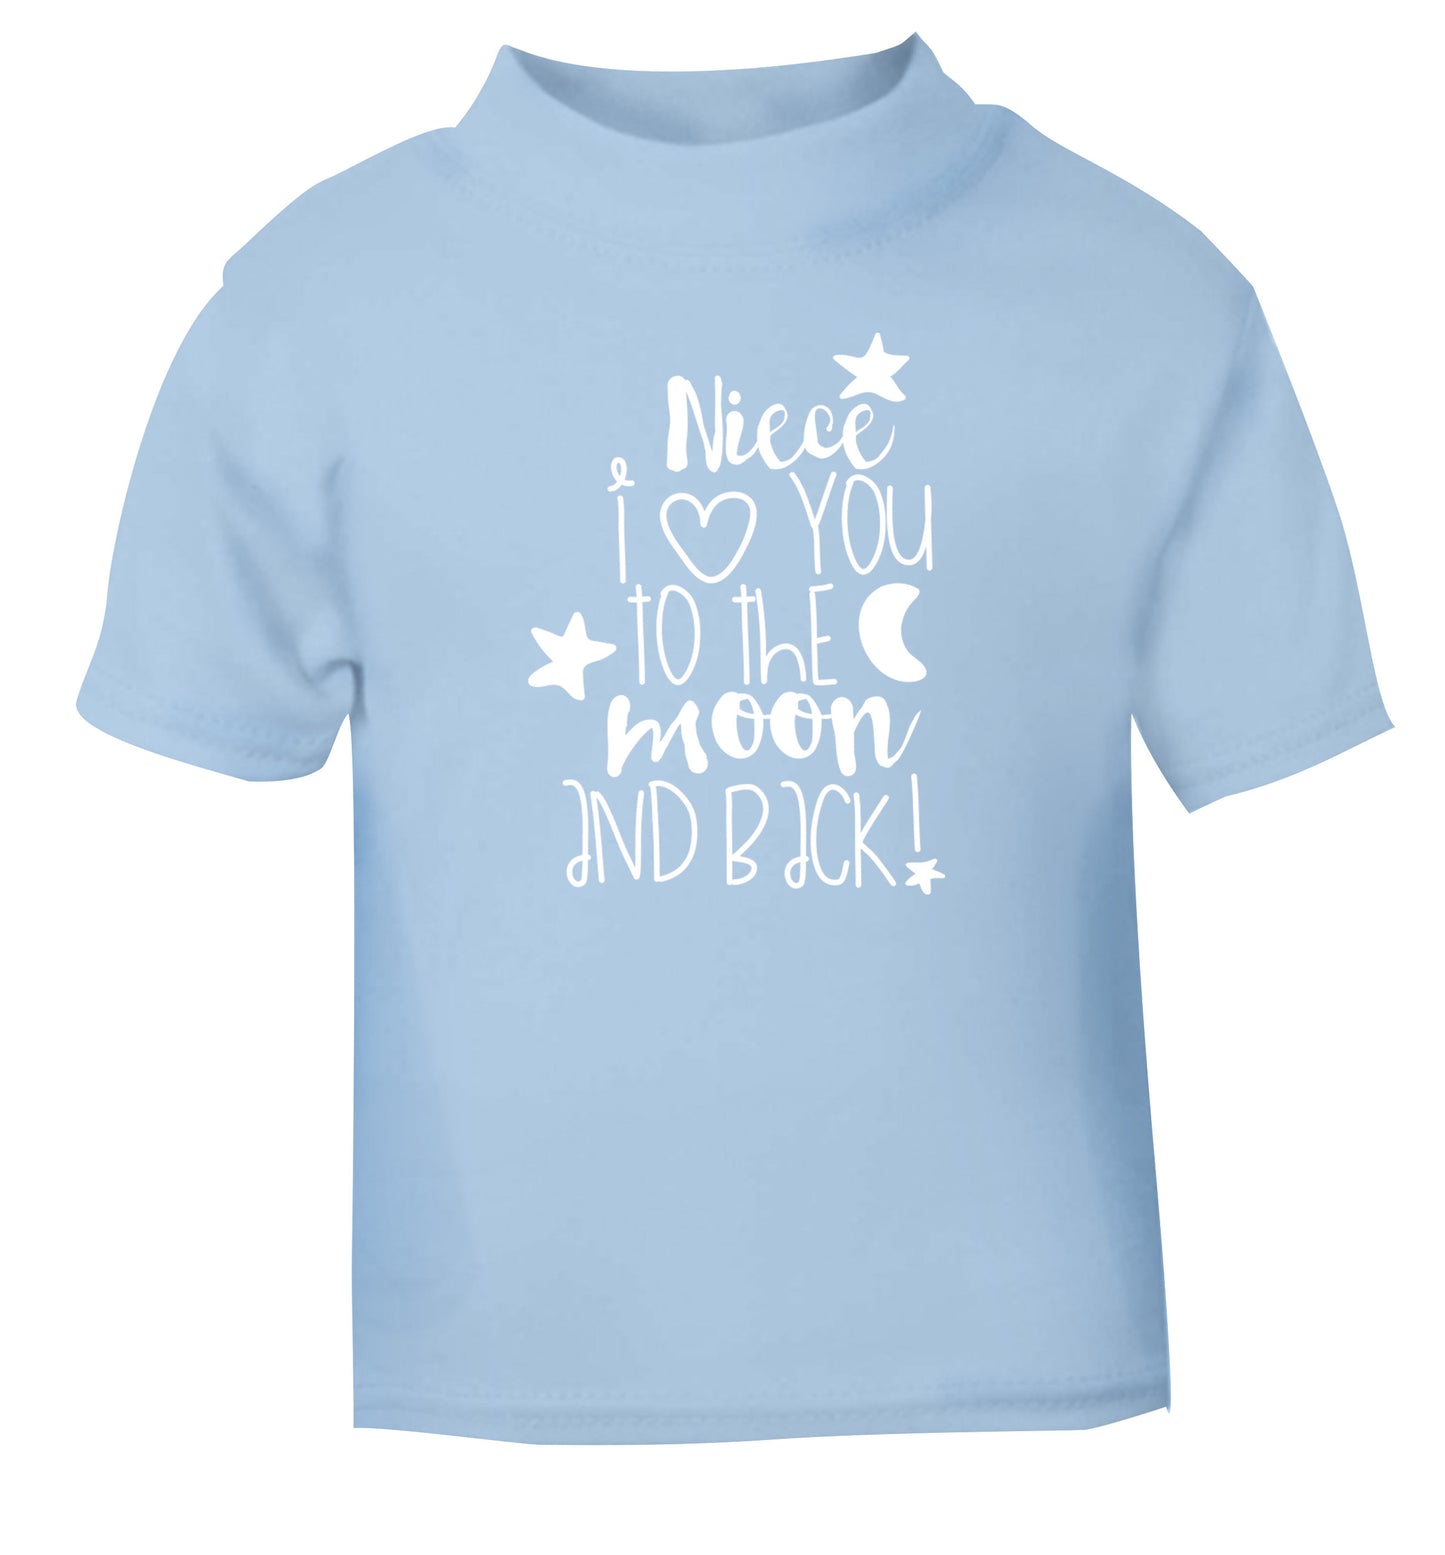 Niece I love you to the moon and back light blue Baby Toddler Tshirt 2 Years